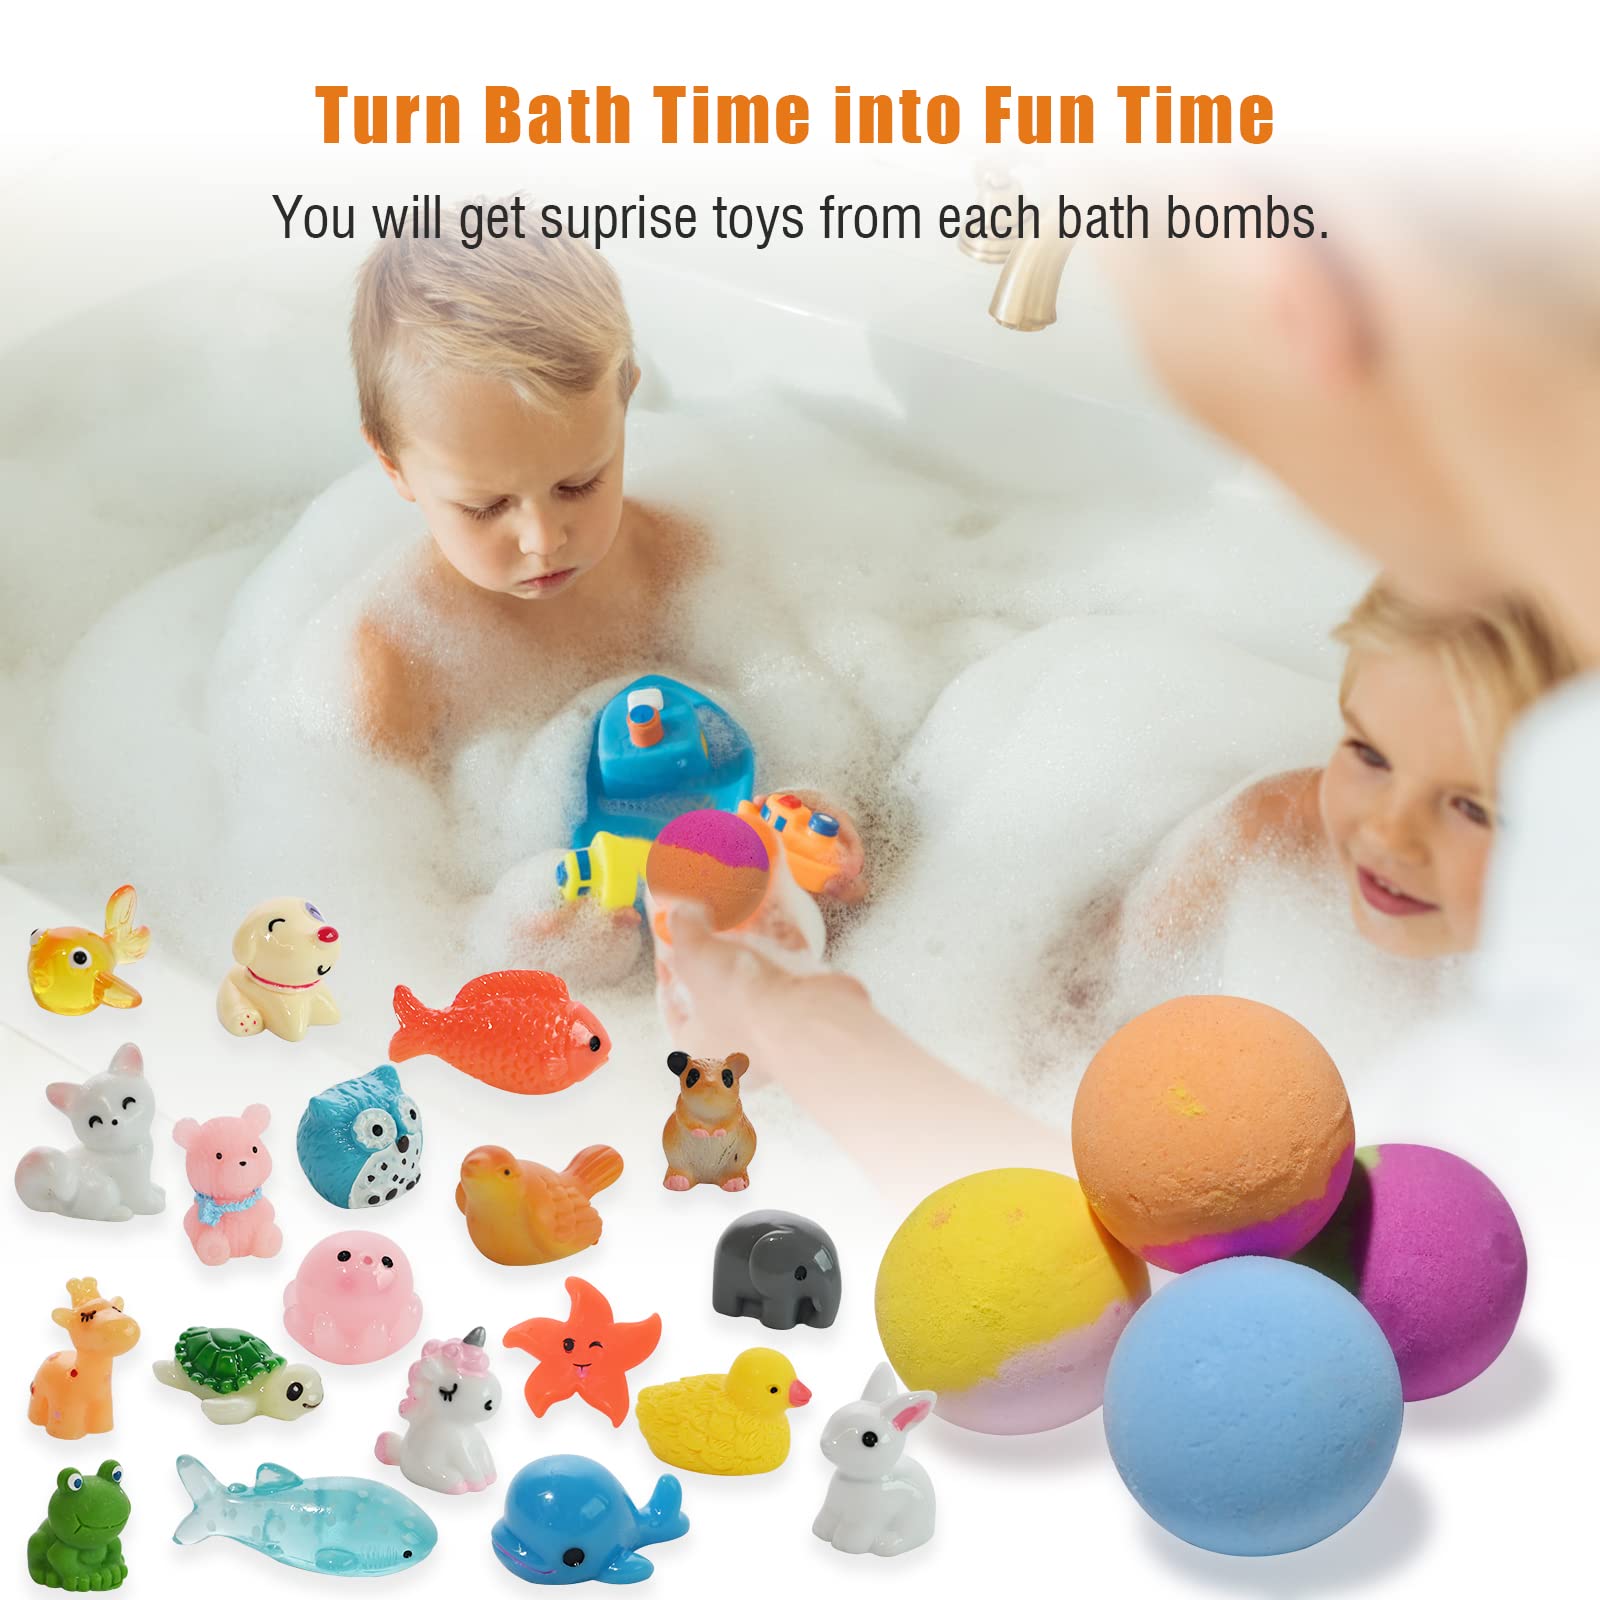 Bath Bombs for Kids with Surprise Inside for Girls Boys - 20 Pack Bath Bombs Gift Set, Handmade Bubble Bath Fizzies Spa Fizz Balls Kit for Children Birthday Christmas Easter Day Gift